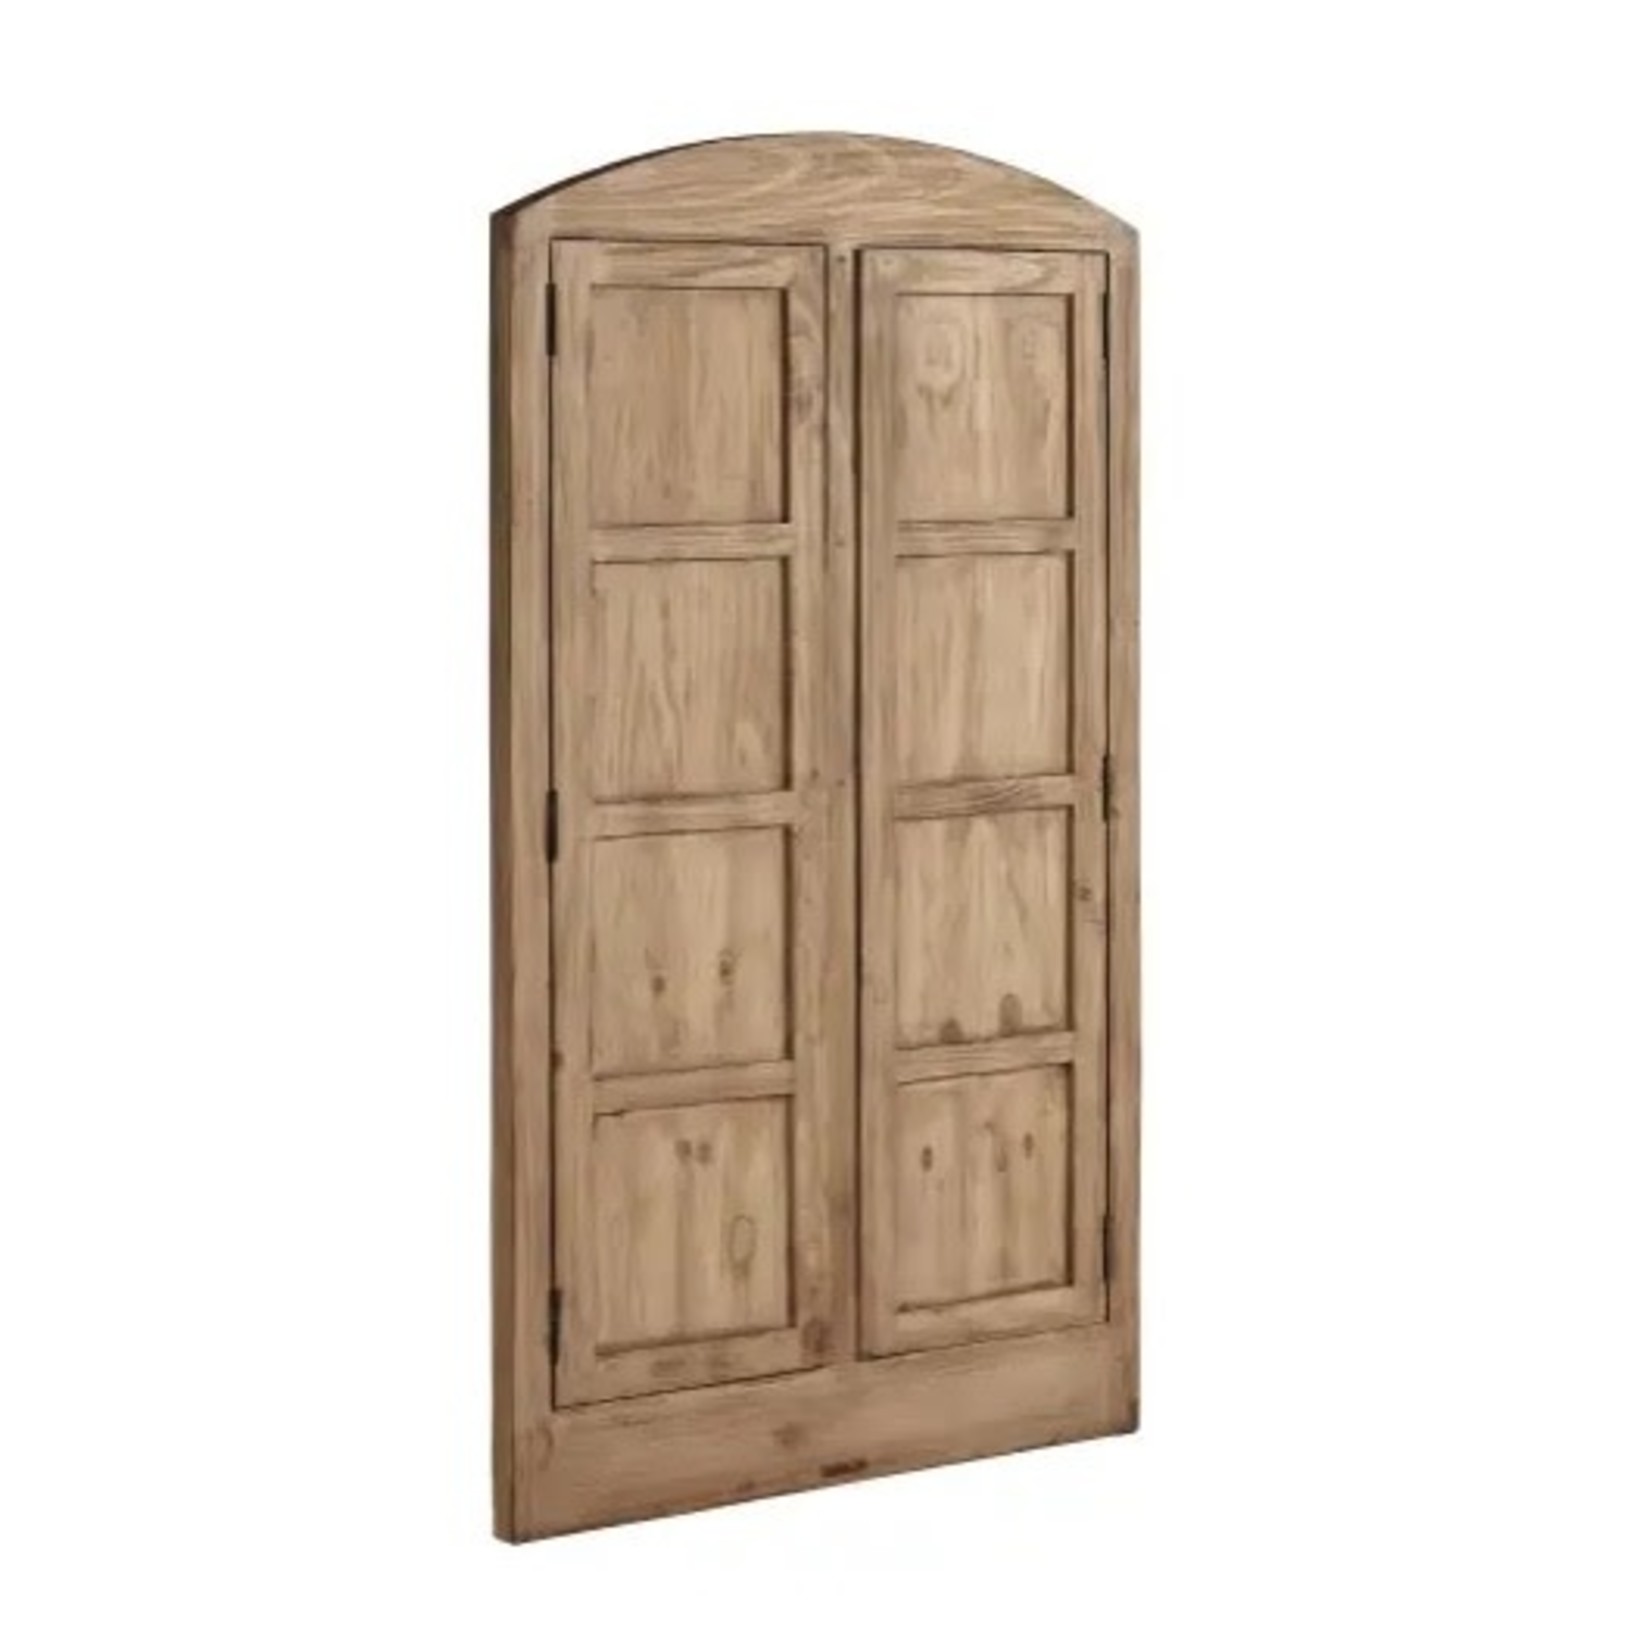 Eased Arched door wind casing